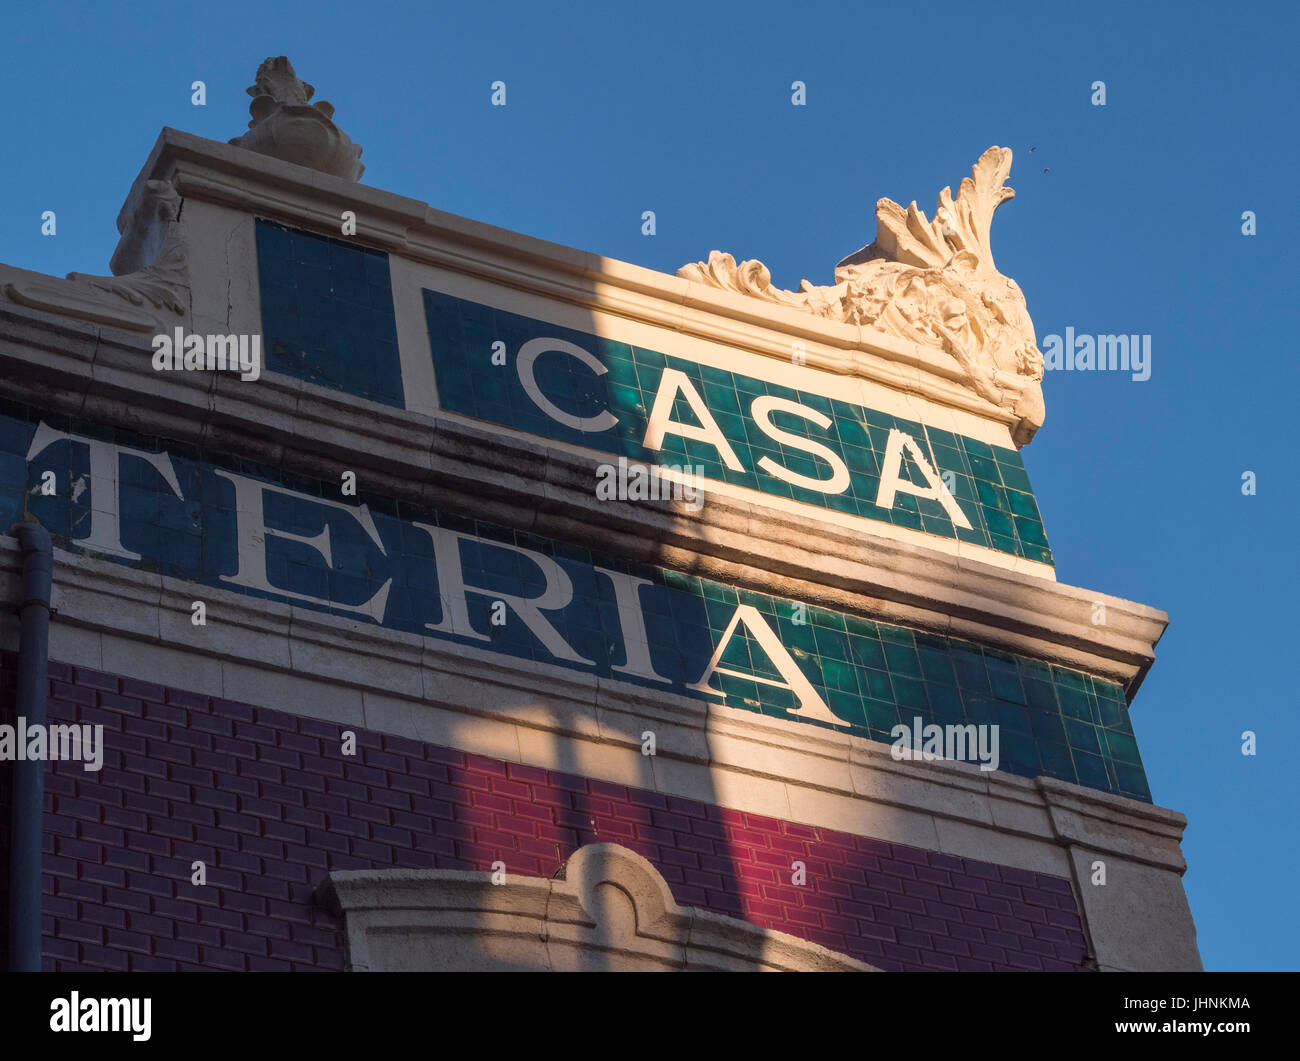 detail of cornice of palace of epoch close to the seafront, to the evening in Almeria, Andalusia, Spain Stock Photo